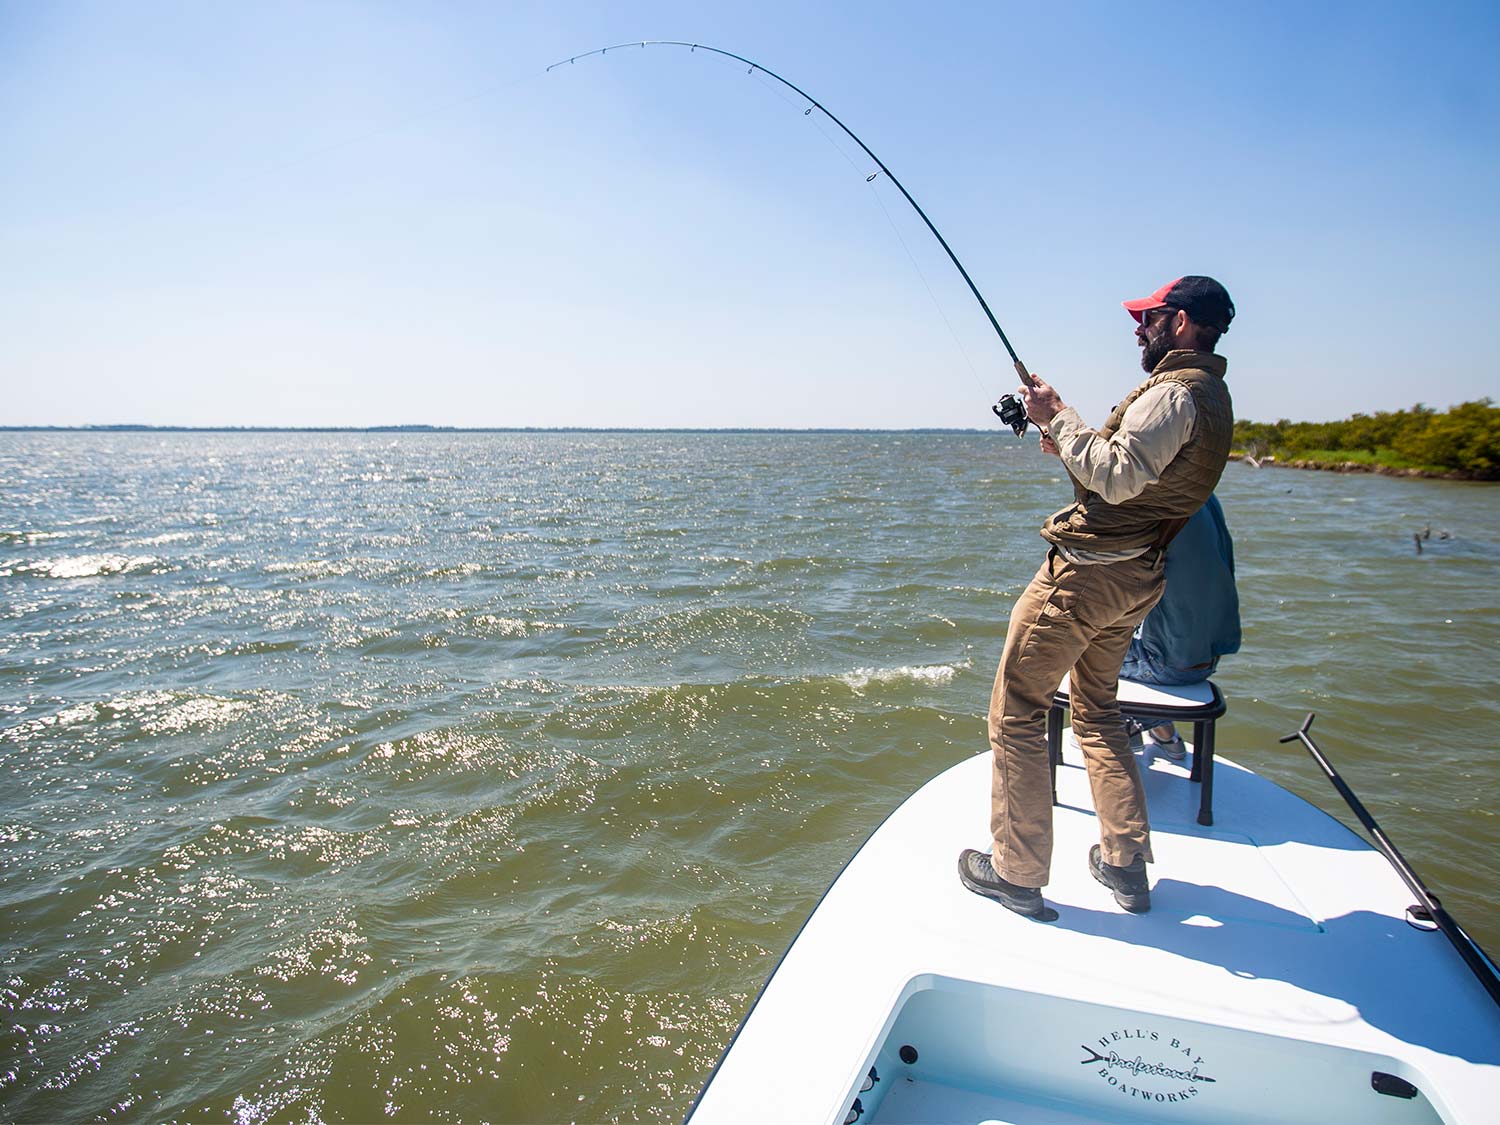 "Florida's Water Crisis Has Sport Fishing on the Brink of Collapse" by Andrew McKean